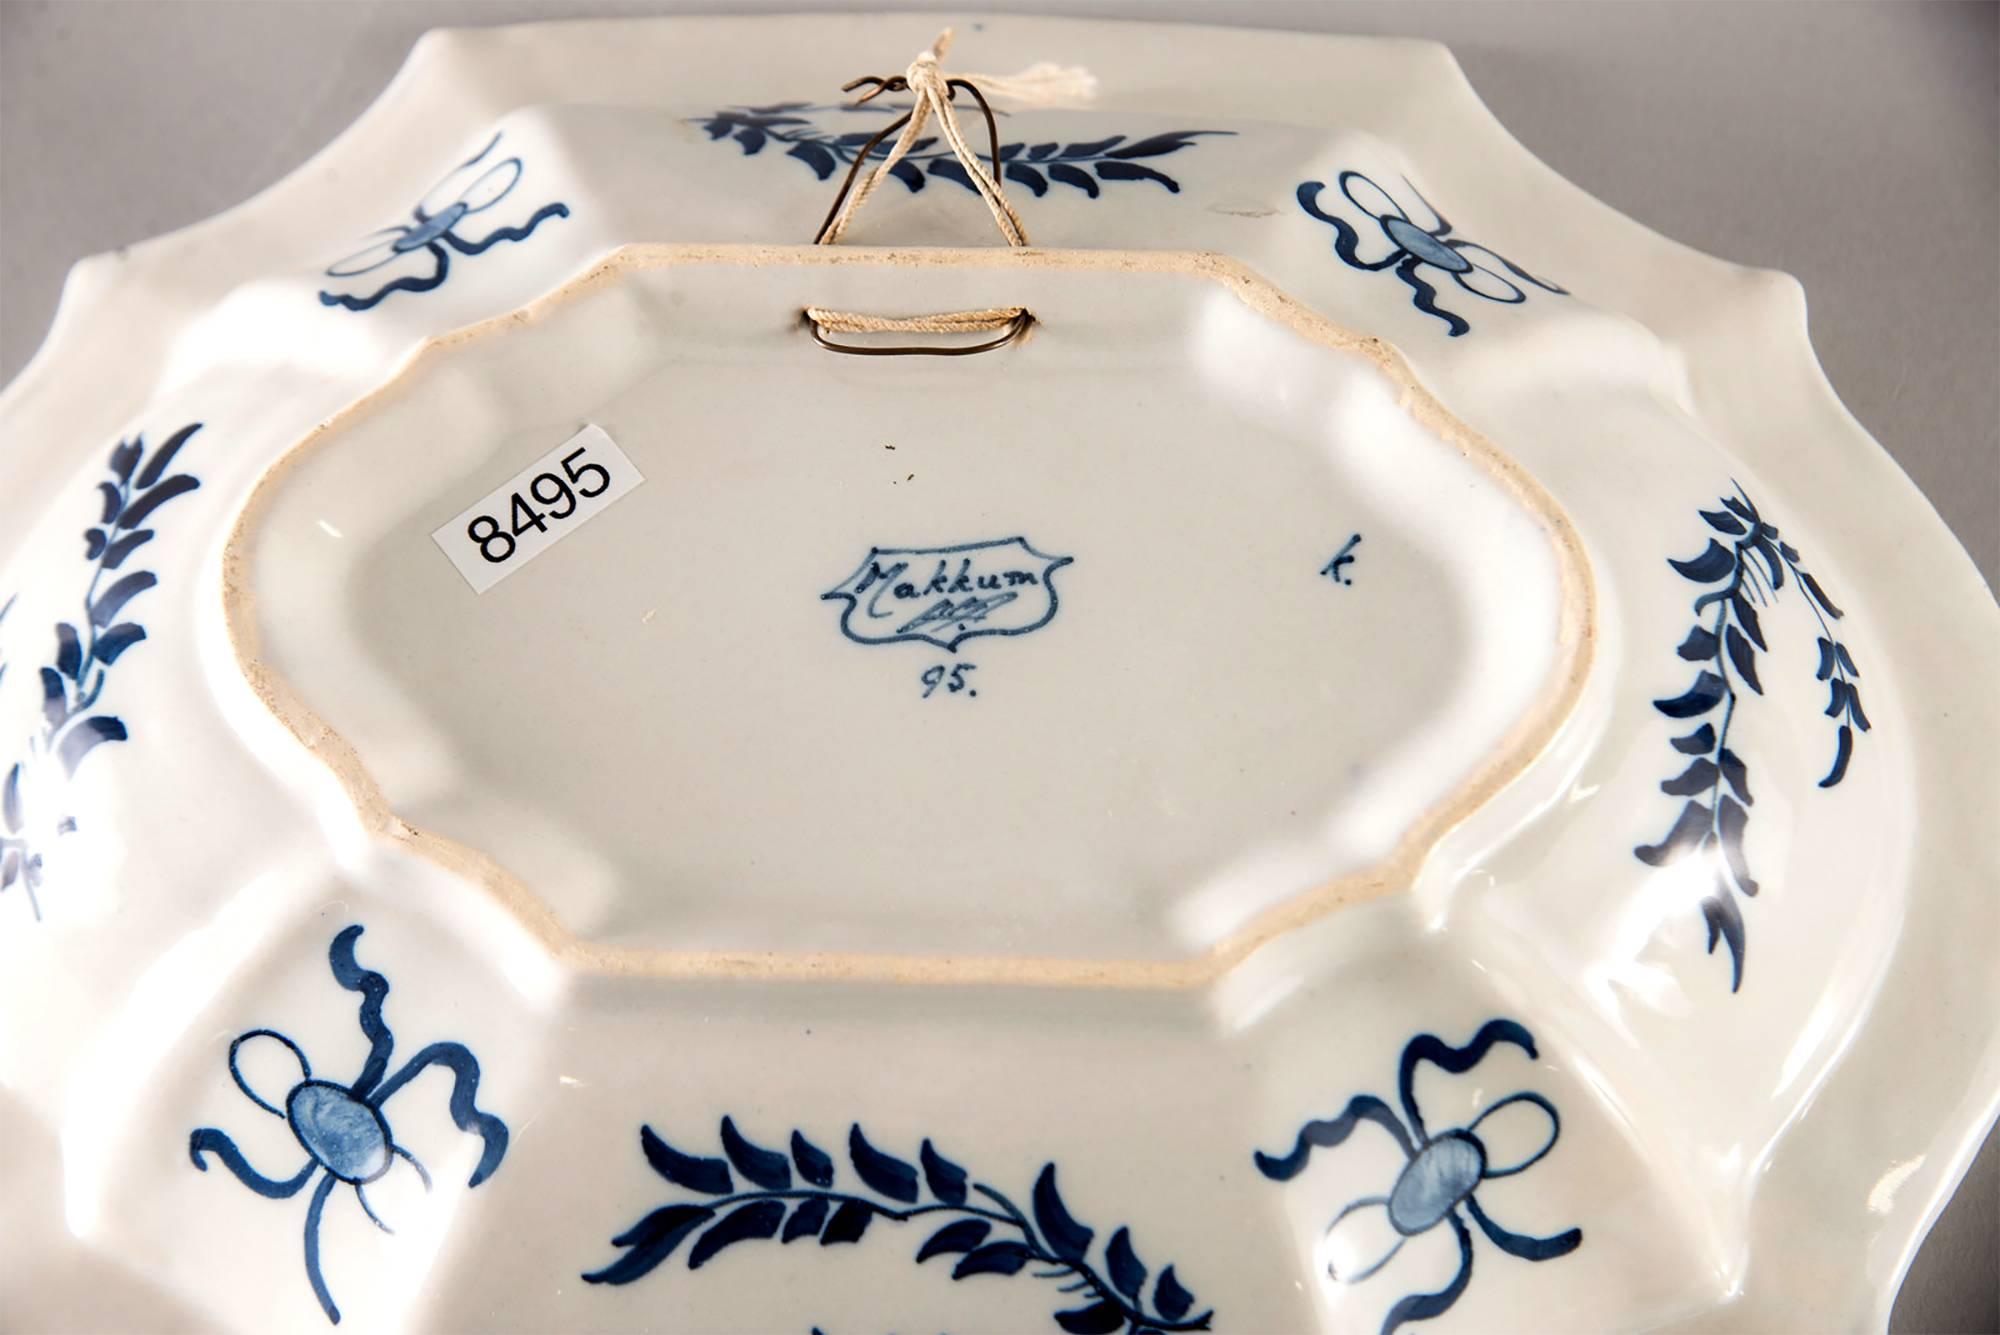 Delft platter marked on the underside of base with a blue on white design of two Chinese figures with pea hens and flowers, circa 1920s. Excellent vintage condition with no flaws found.